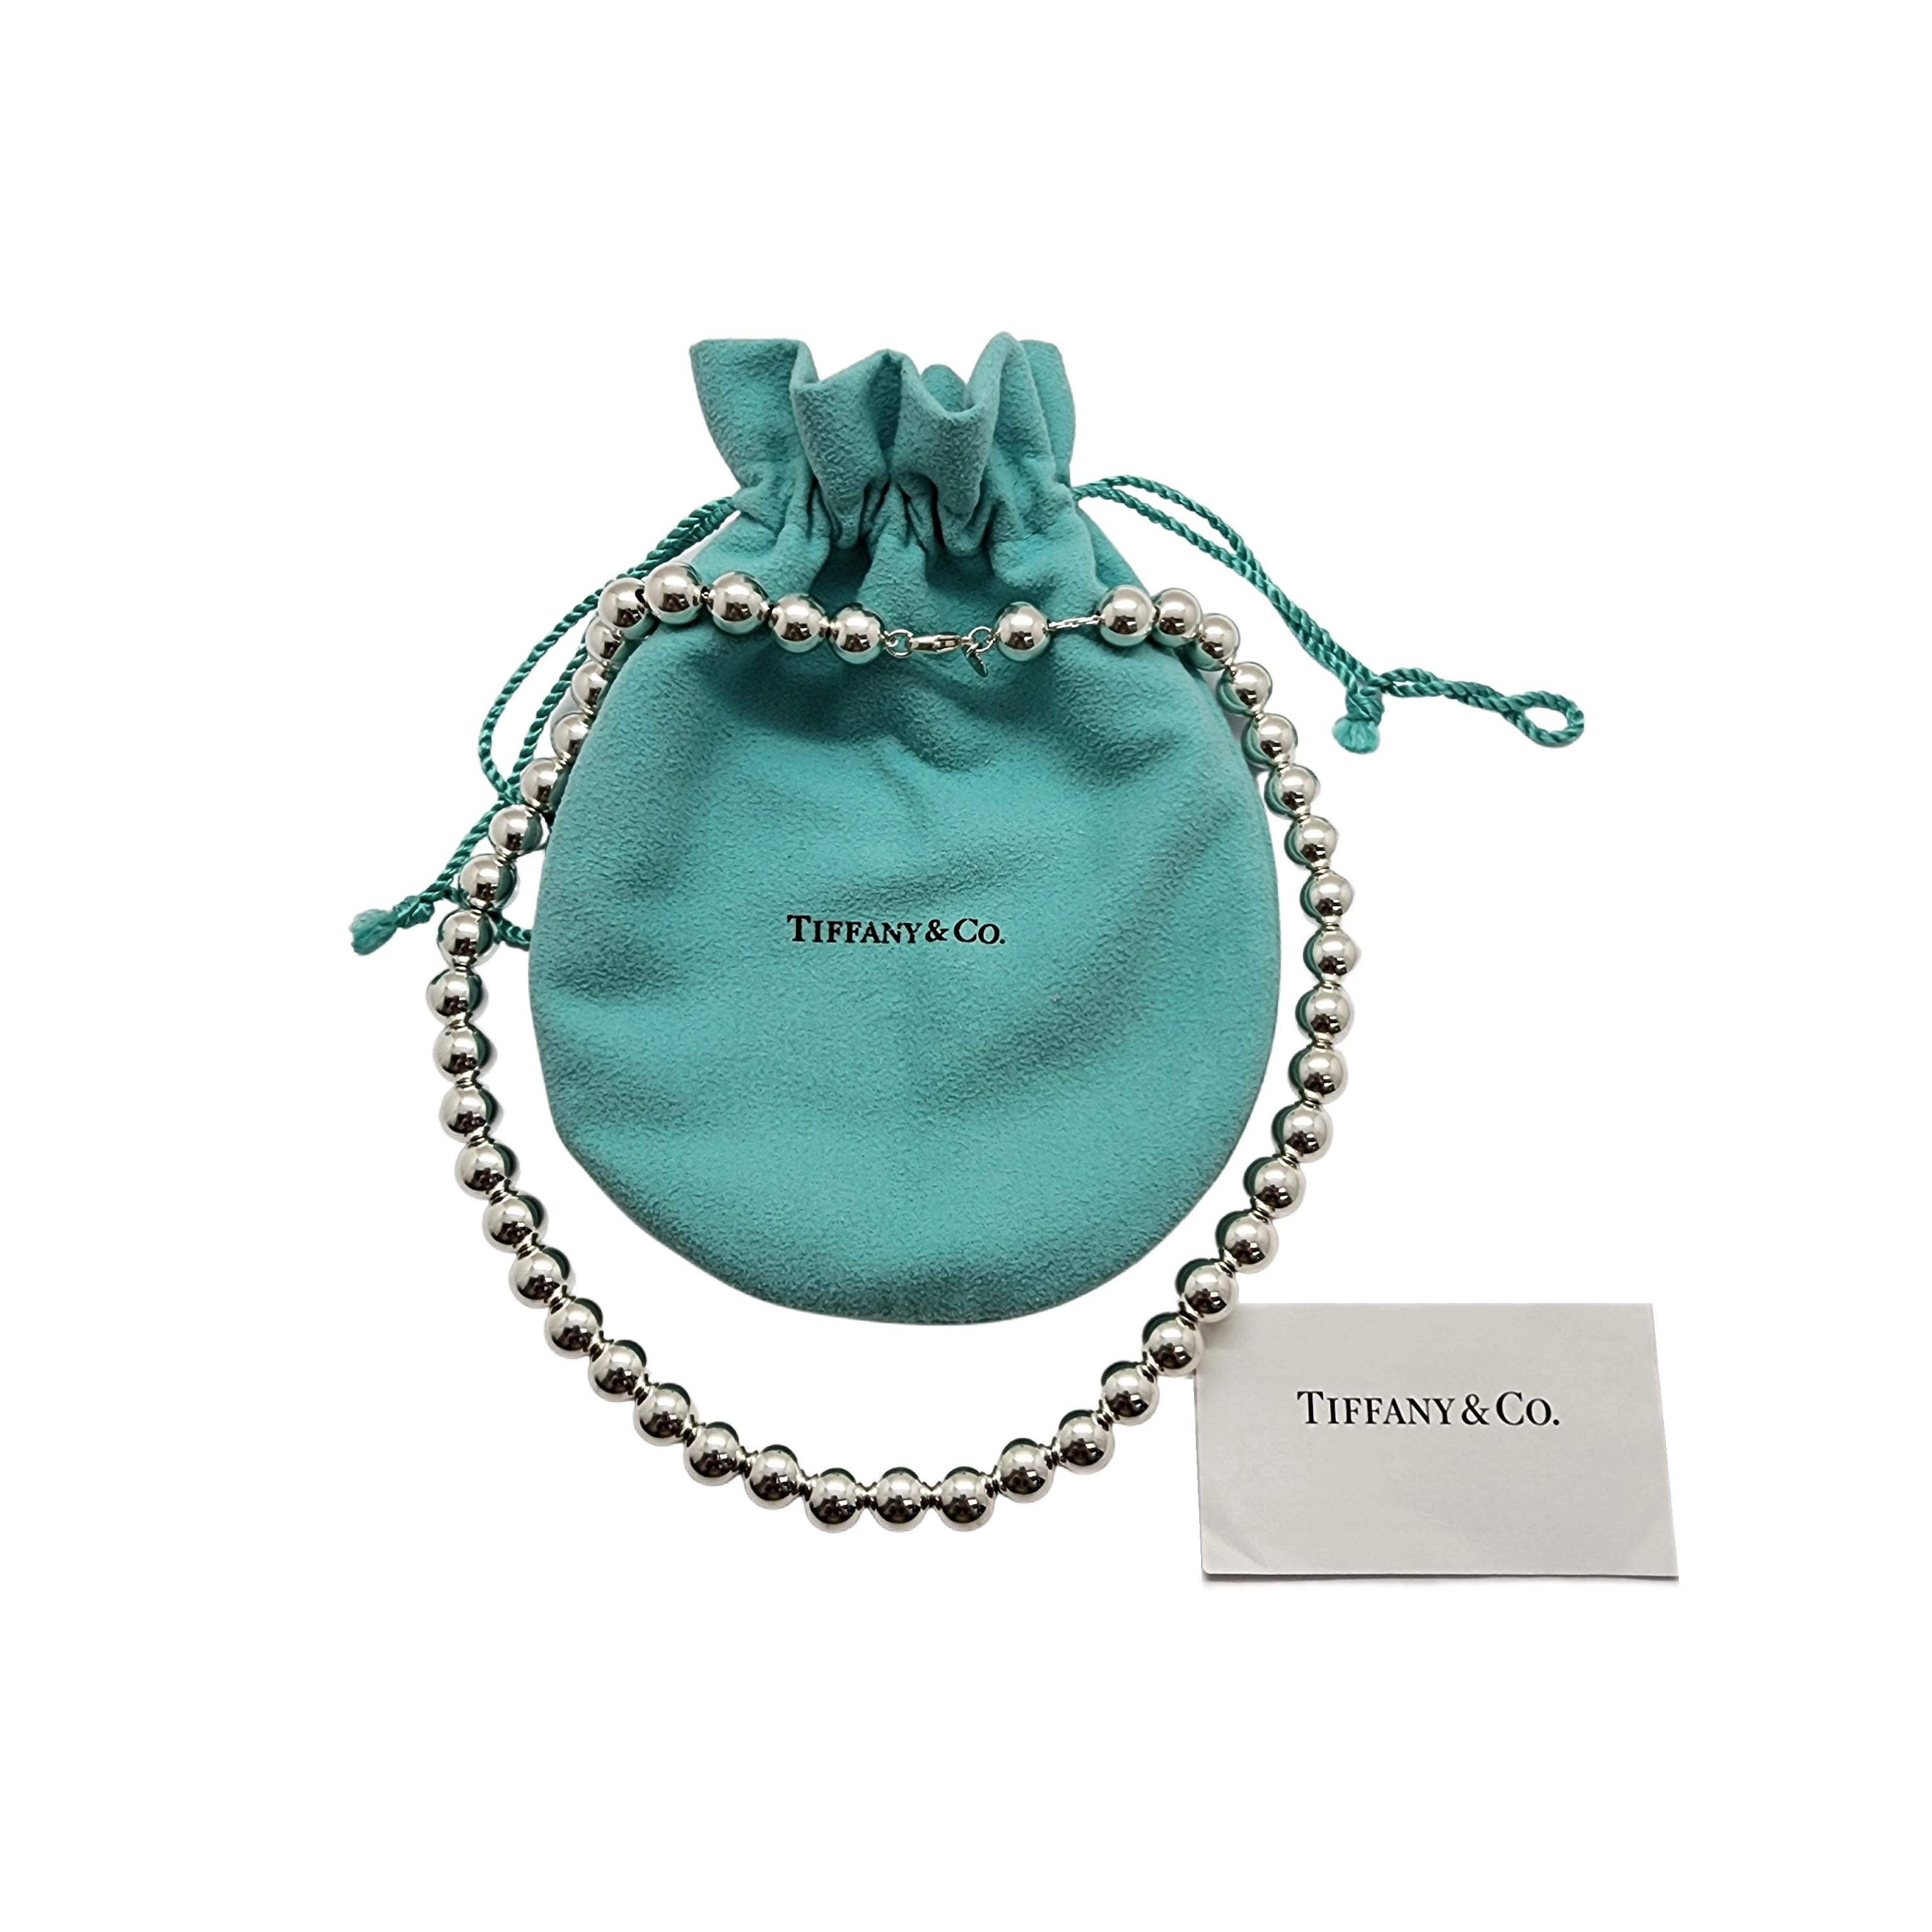 Tiffany & Co. Hardwear Sterling Silver Ball Necklace with Pouch 3